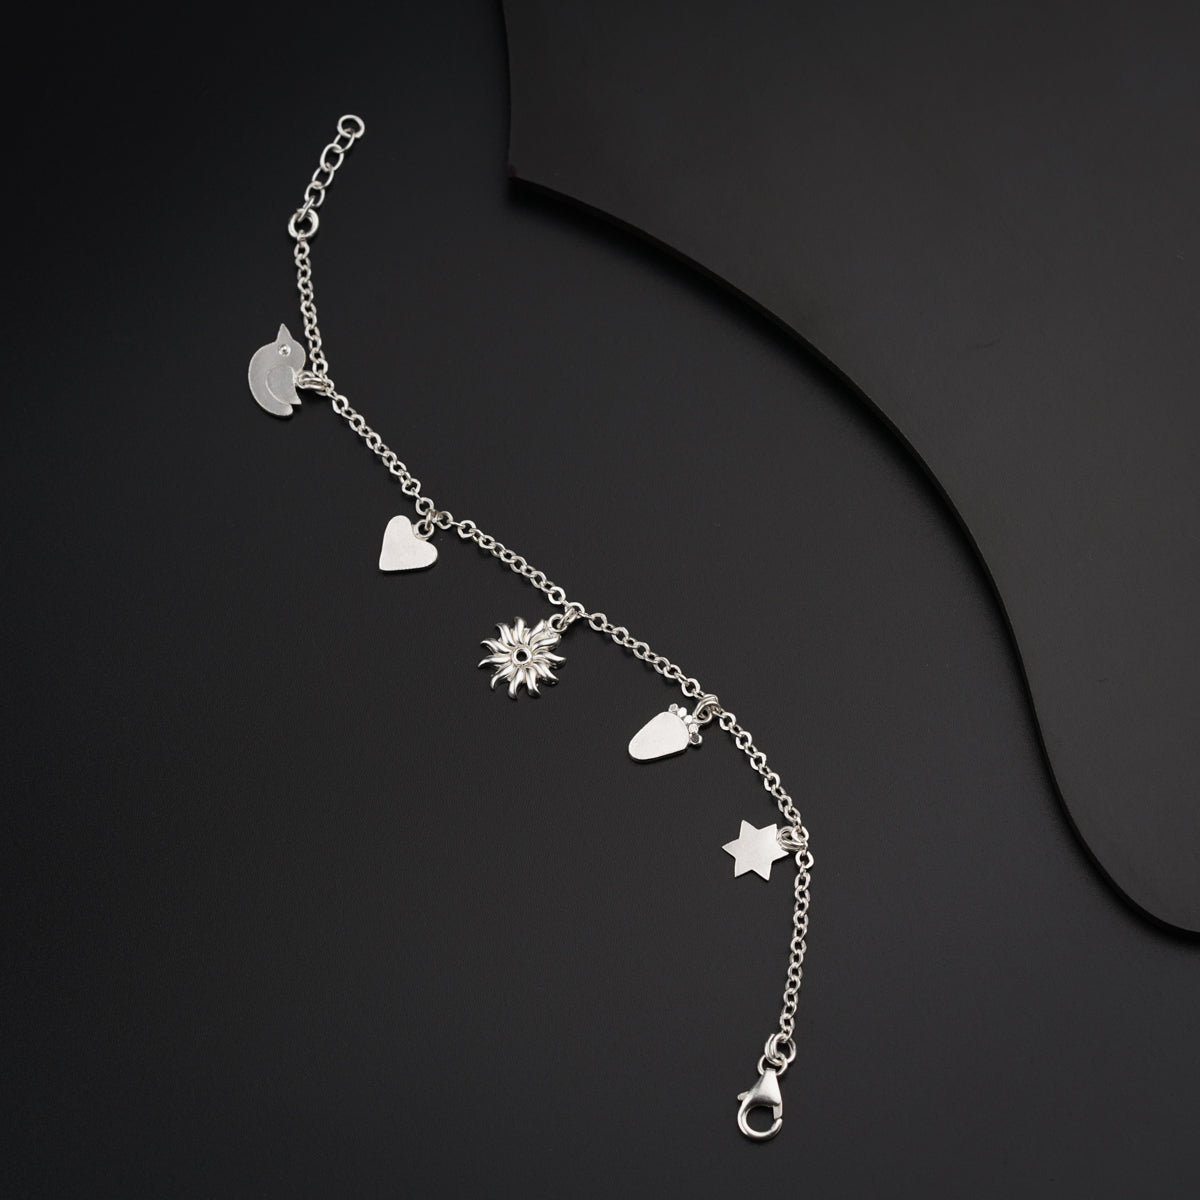 a silver bracelet with hearts and stars on a black background